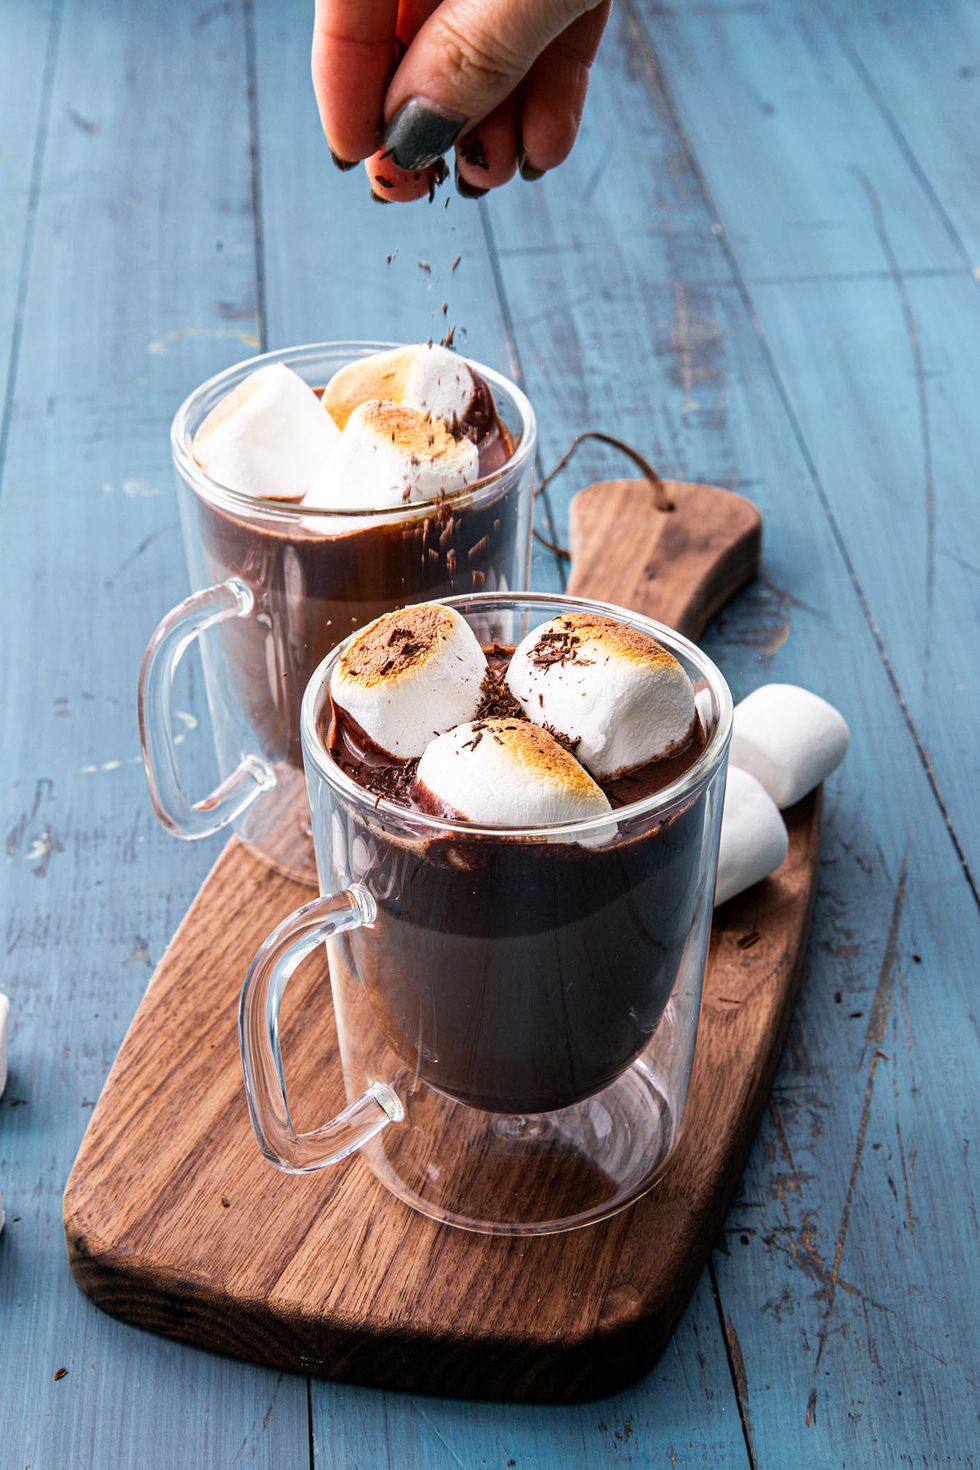 Try this in Autumn} :: take a flask of hot chocolate along on a walk.